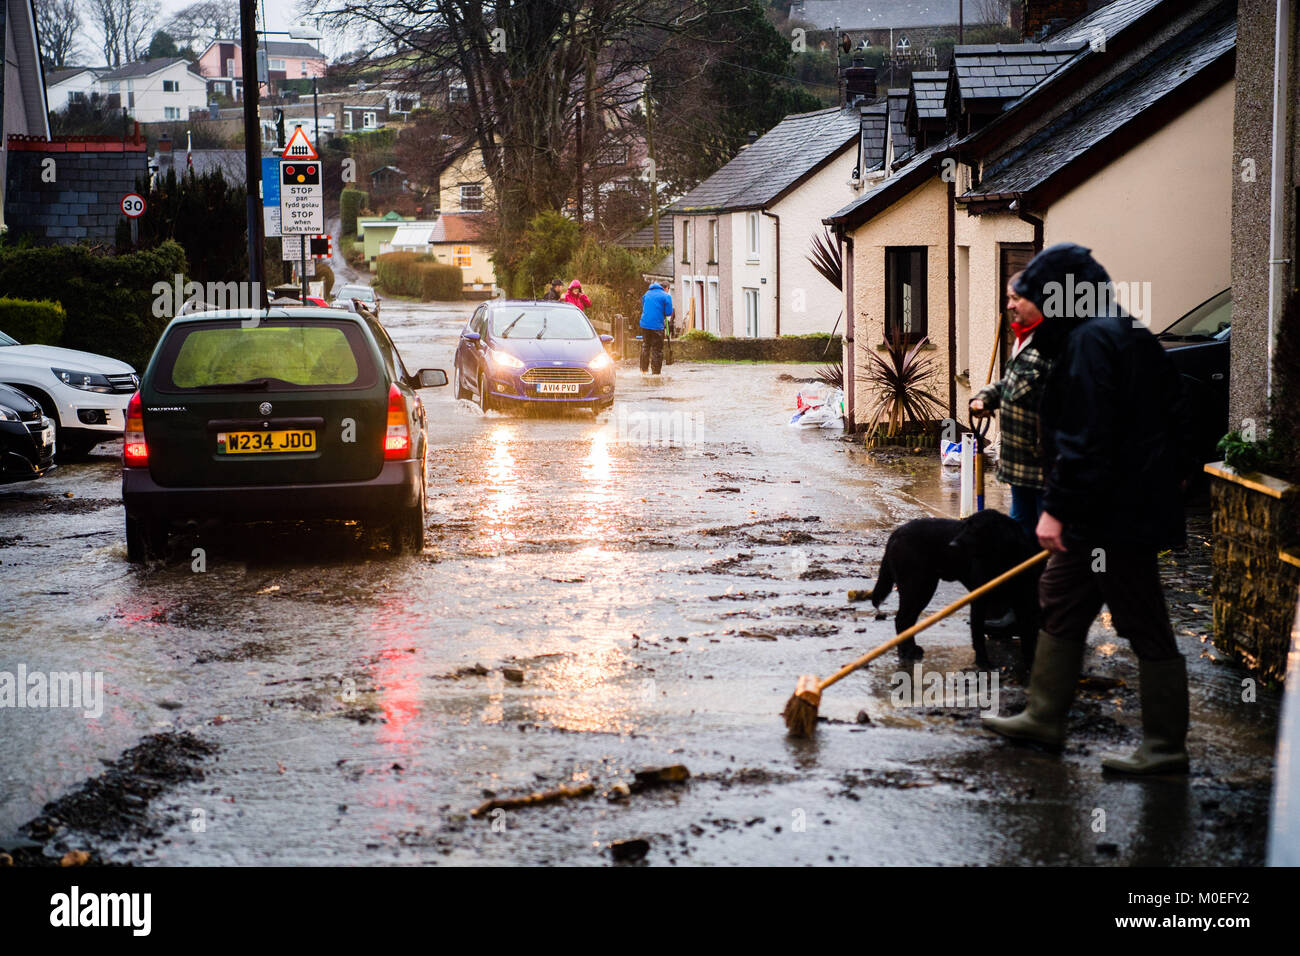 Llandre, Ceredigion Wales, Sunday 21 January 2018  UK Weather: Flood water cascade like a river down the main street in LLANDRE near Aberystwyth in Mid Wales, after hours of torrential rain caused the small steam that runs through he village to dramatically burst its banks . Local residents  made improvised sandbags and barriers to try to divert the water away from their houses. The stream overflowed high above the village just outside the parish church, sending debris down and washing away parts of the road surface    photo © Keith Morris / Alamy Live News Stock Photo